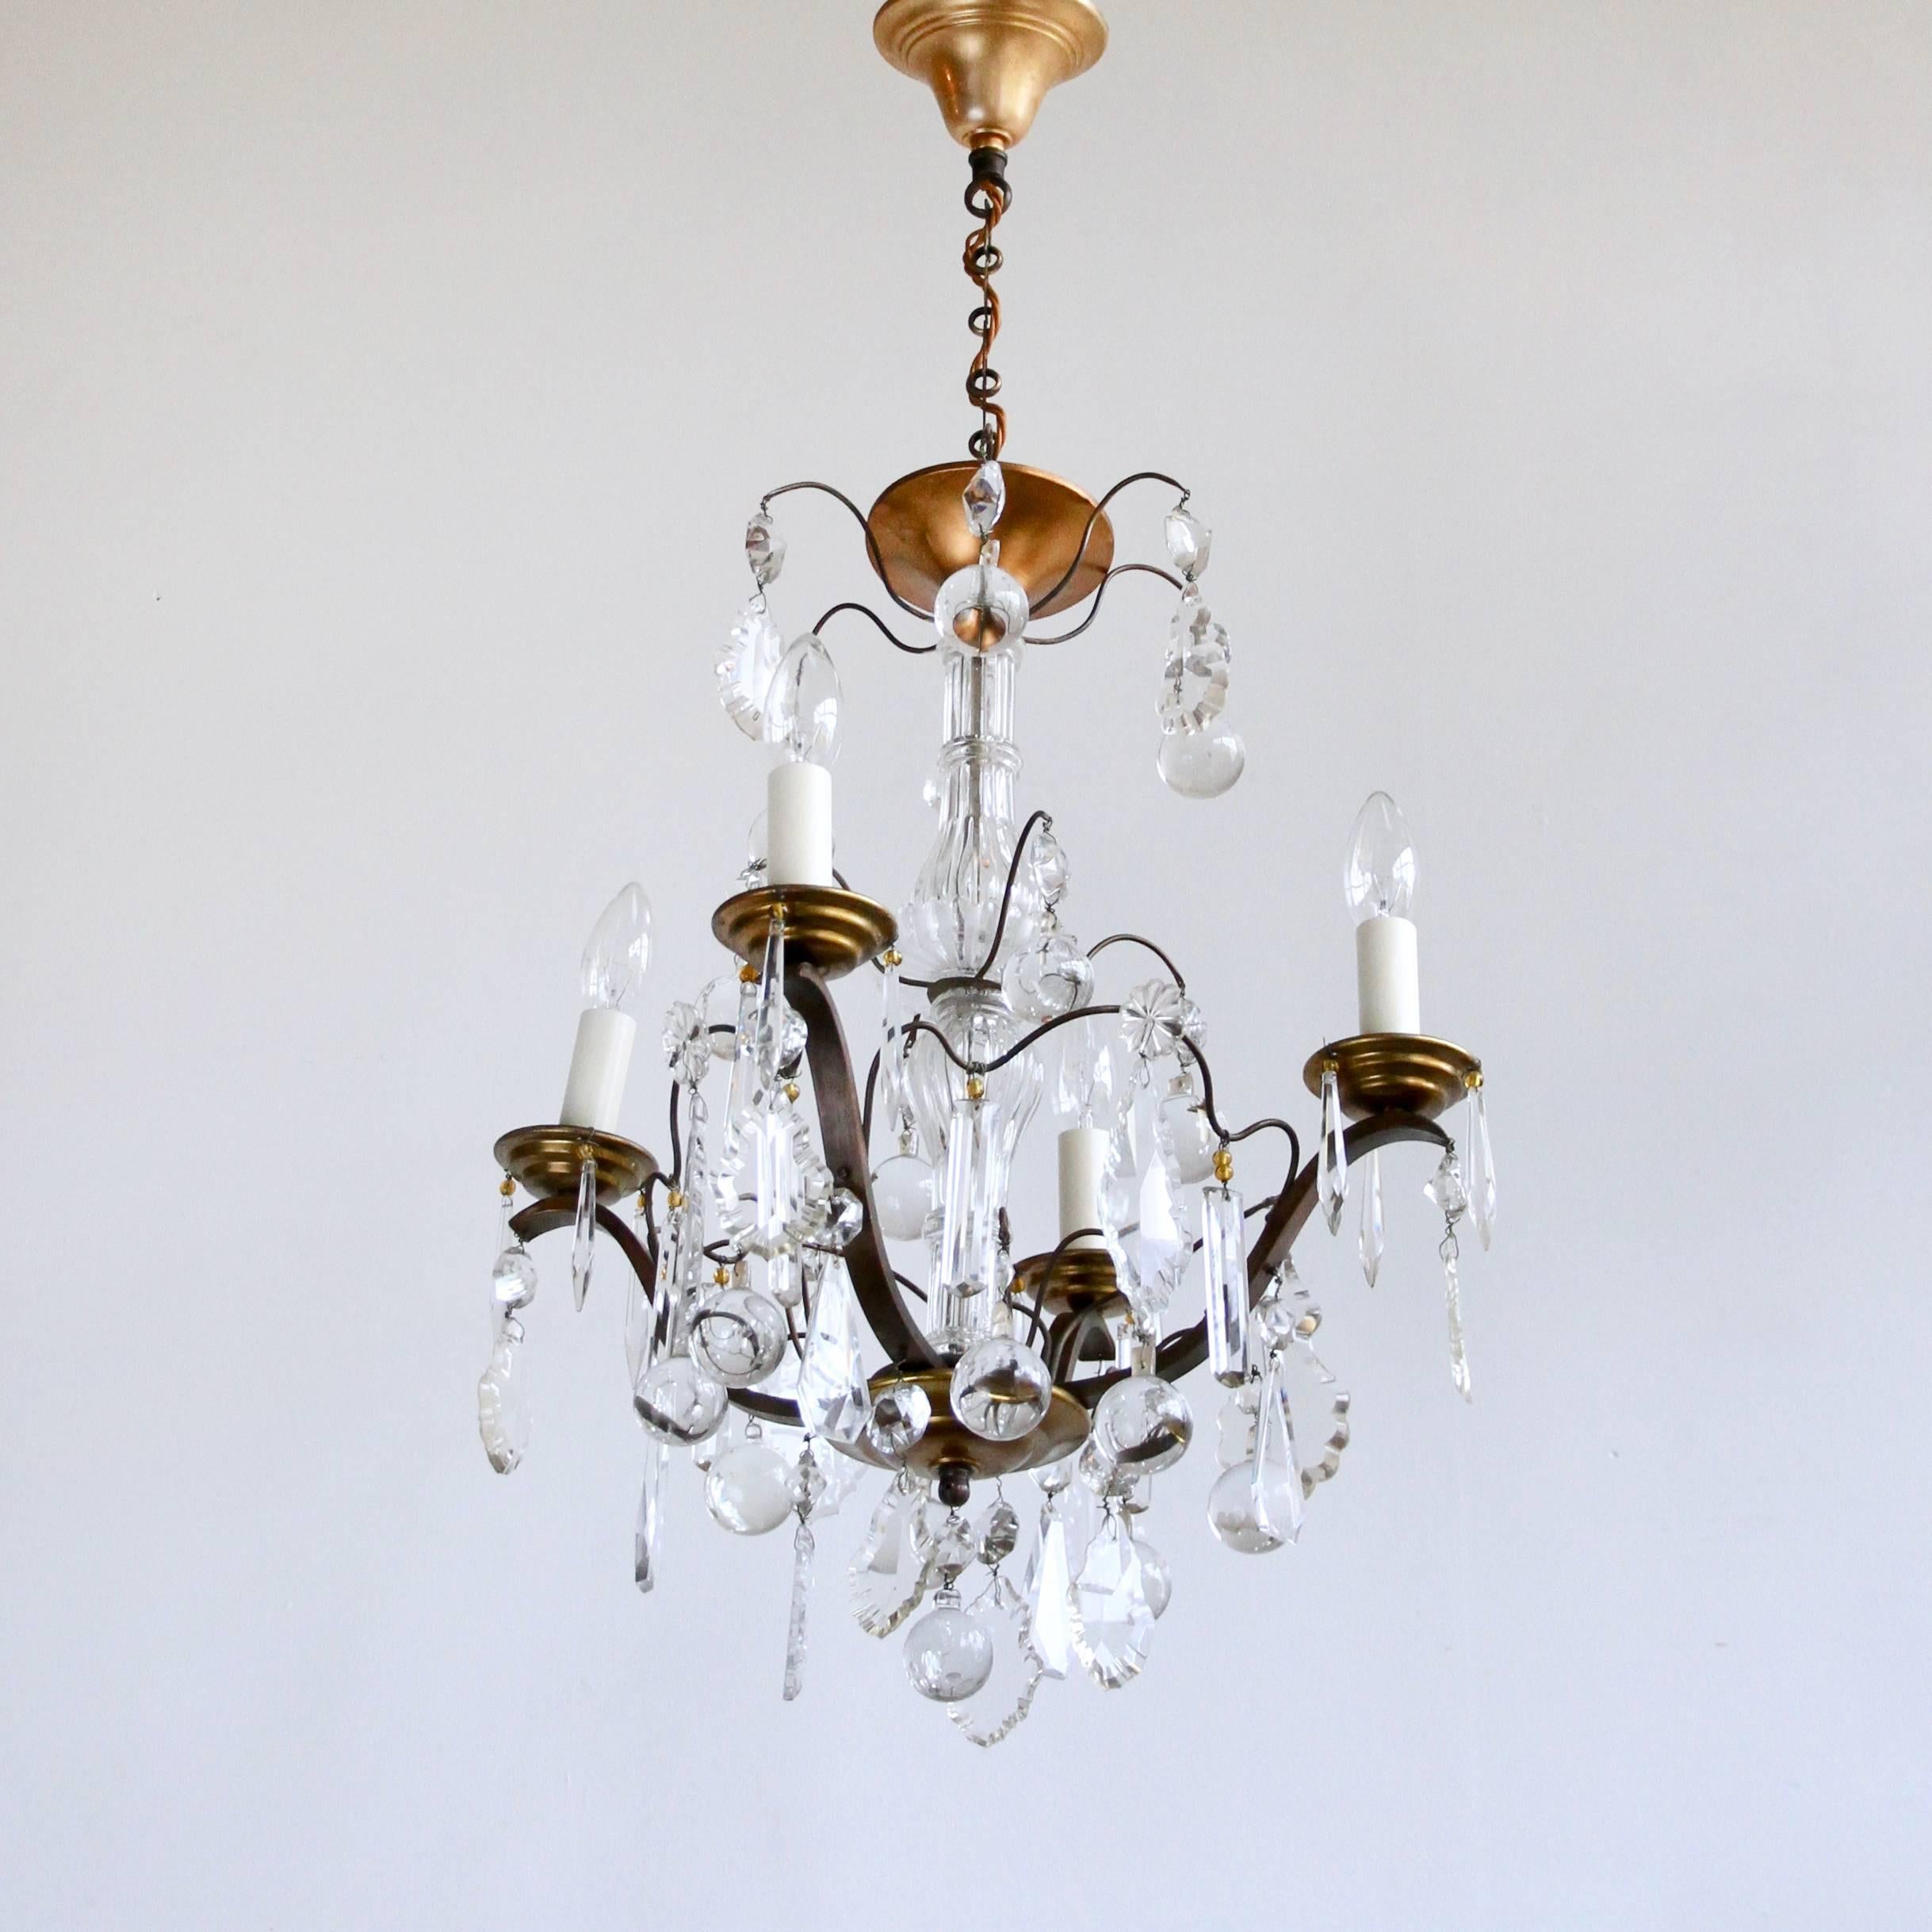 Fully rewired and restored this Louis XIV style chandelier originates from early 1900s France. Retaining its original crystal and glass it is a stunning centre piece. The proportions of the chandelier make it suitable for small space in a period or